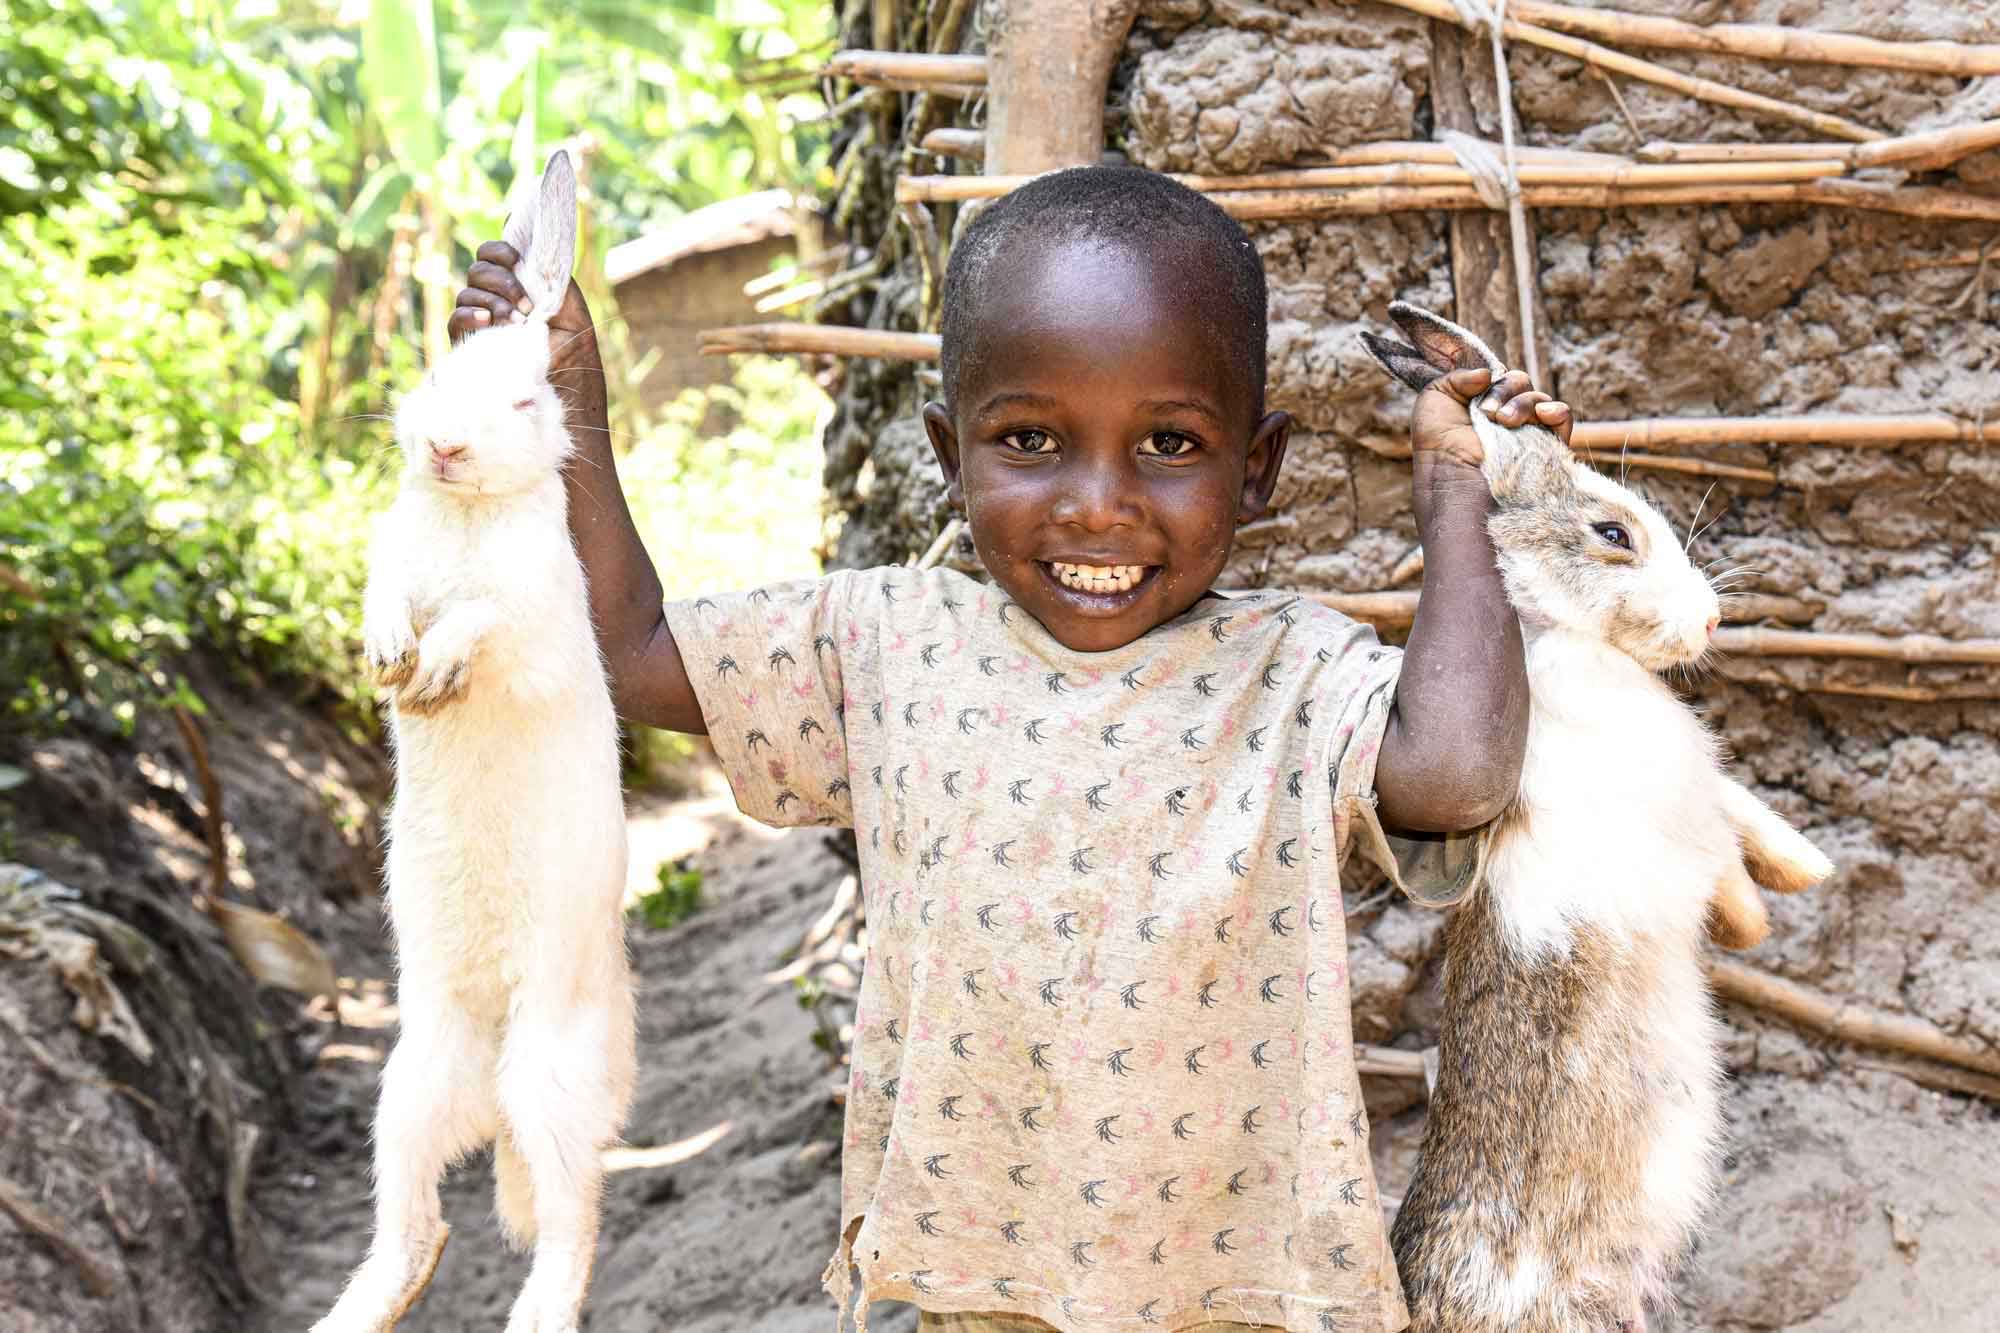 A young child stands outside smiling, while holding up two white rabbits by their ears.